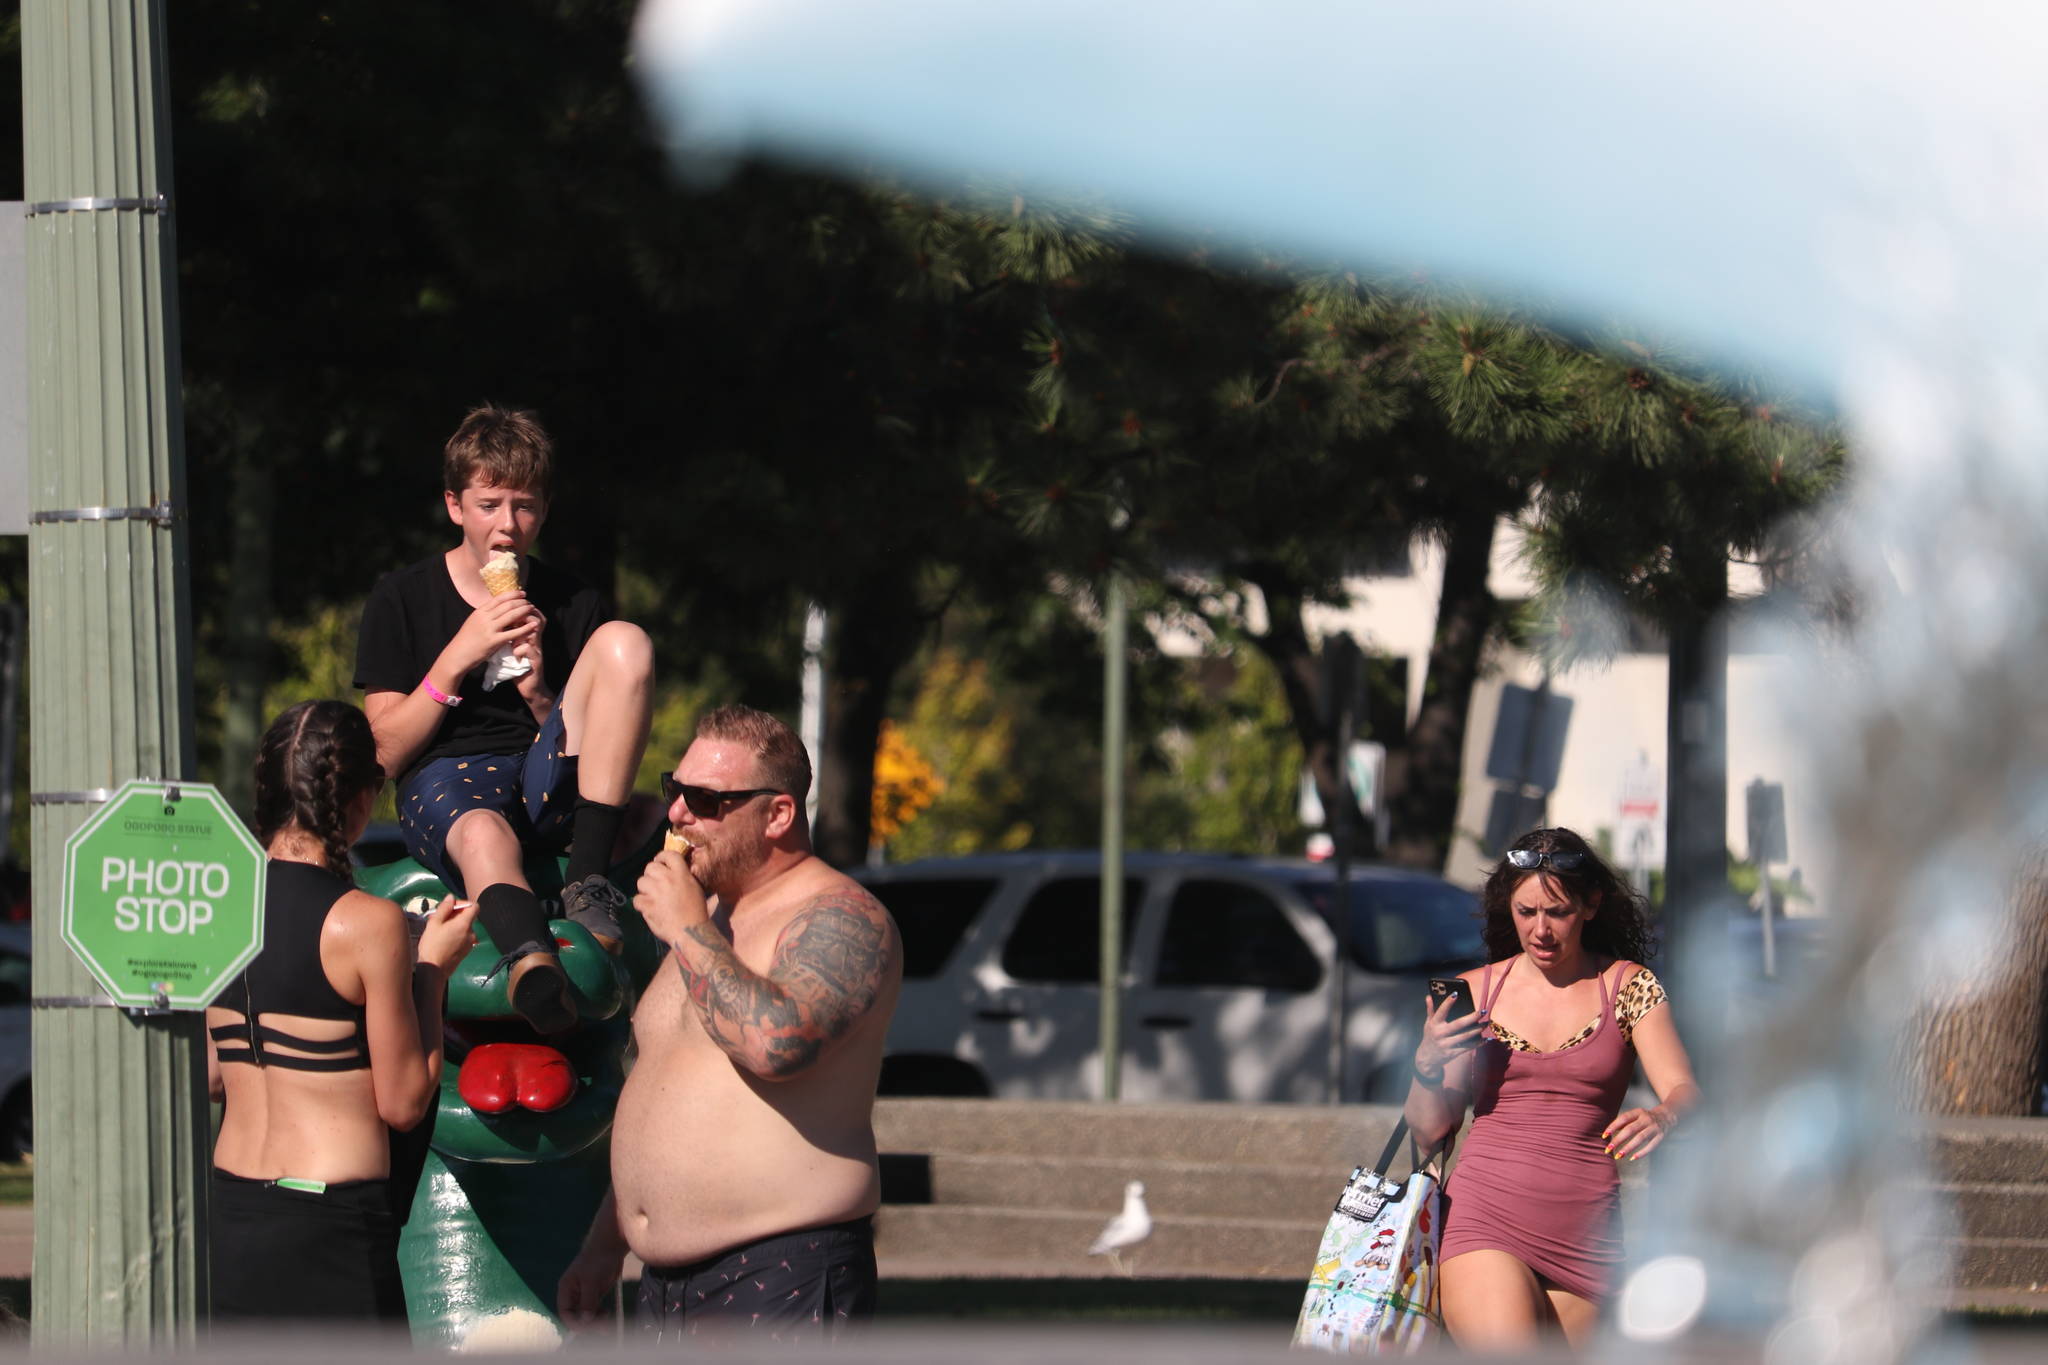 A family enjoys their ice cream in the heat in downtown Kelowna on Monday, July 27. (Aaron Hemens - Capital News)